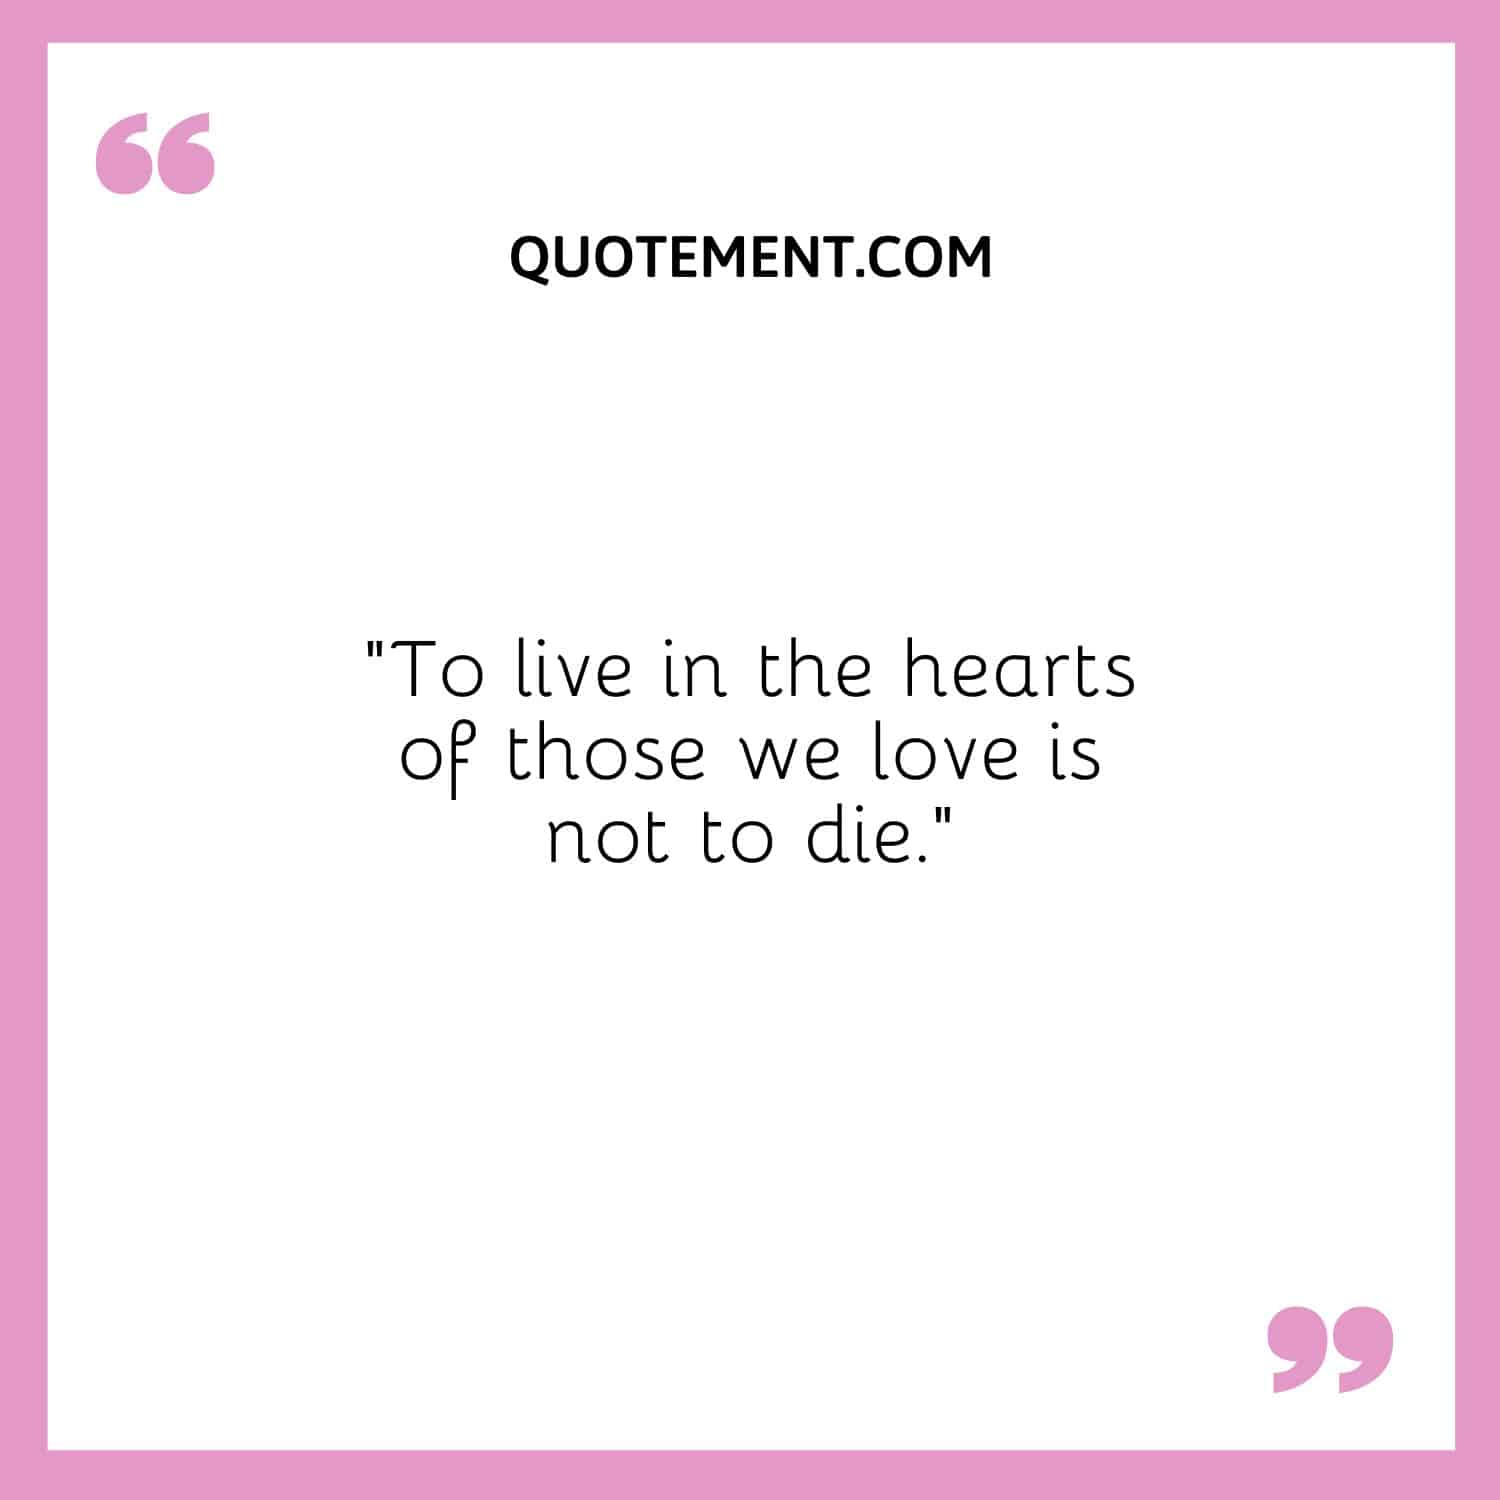 To live in the hearts of those we love is not to die